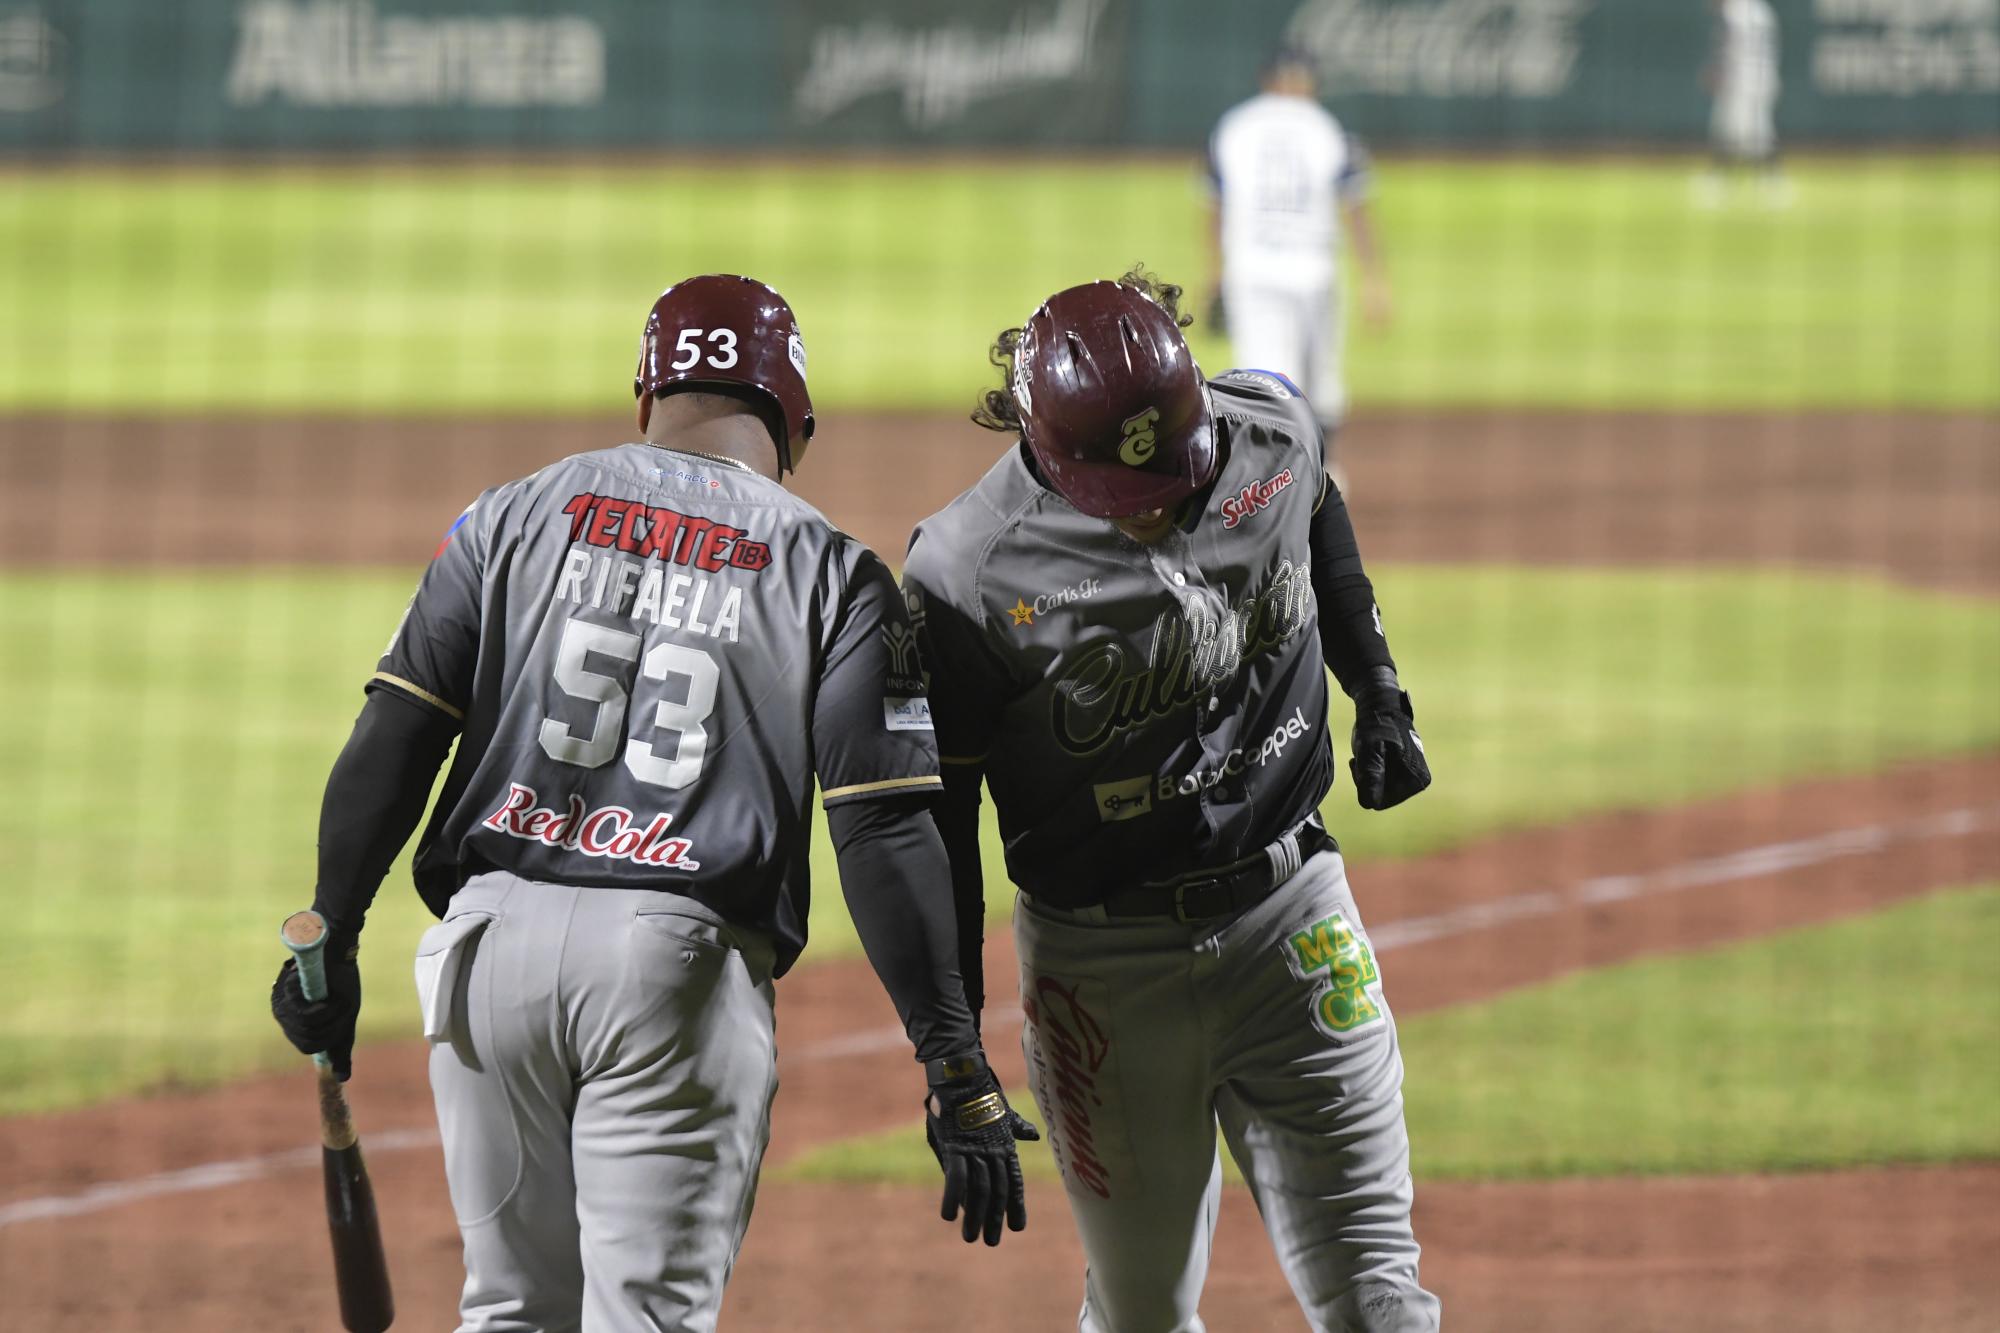 $!Tomateros never let themselves be defeated despite the attacks of Sultanes.